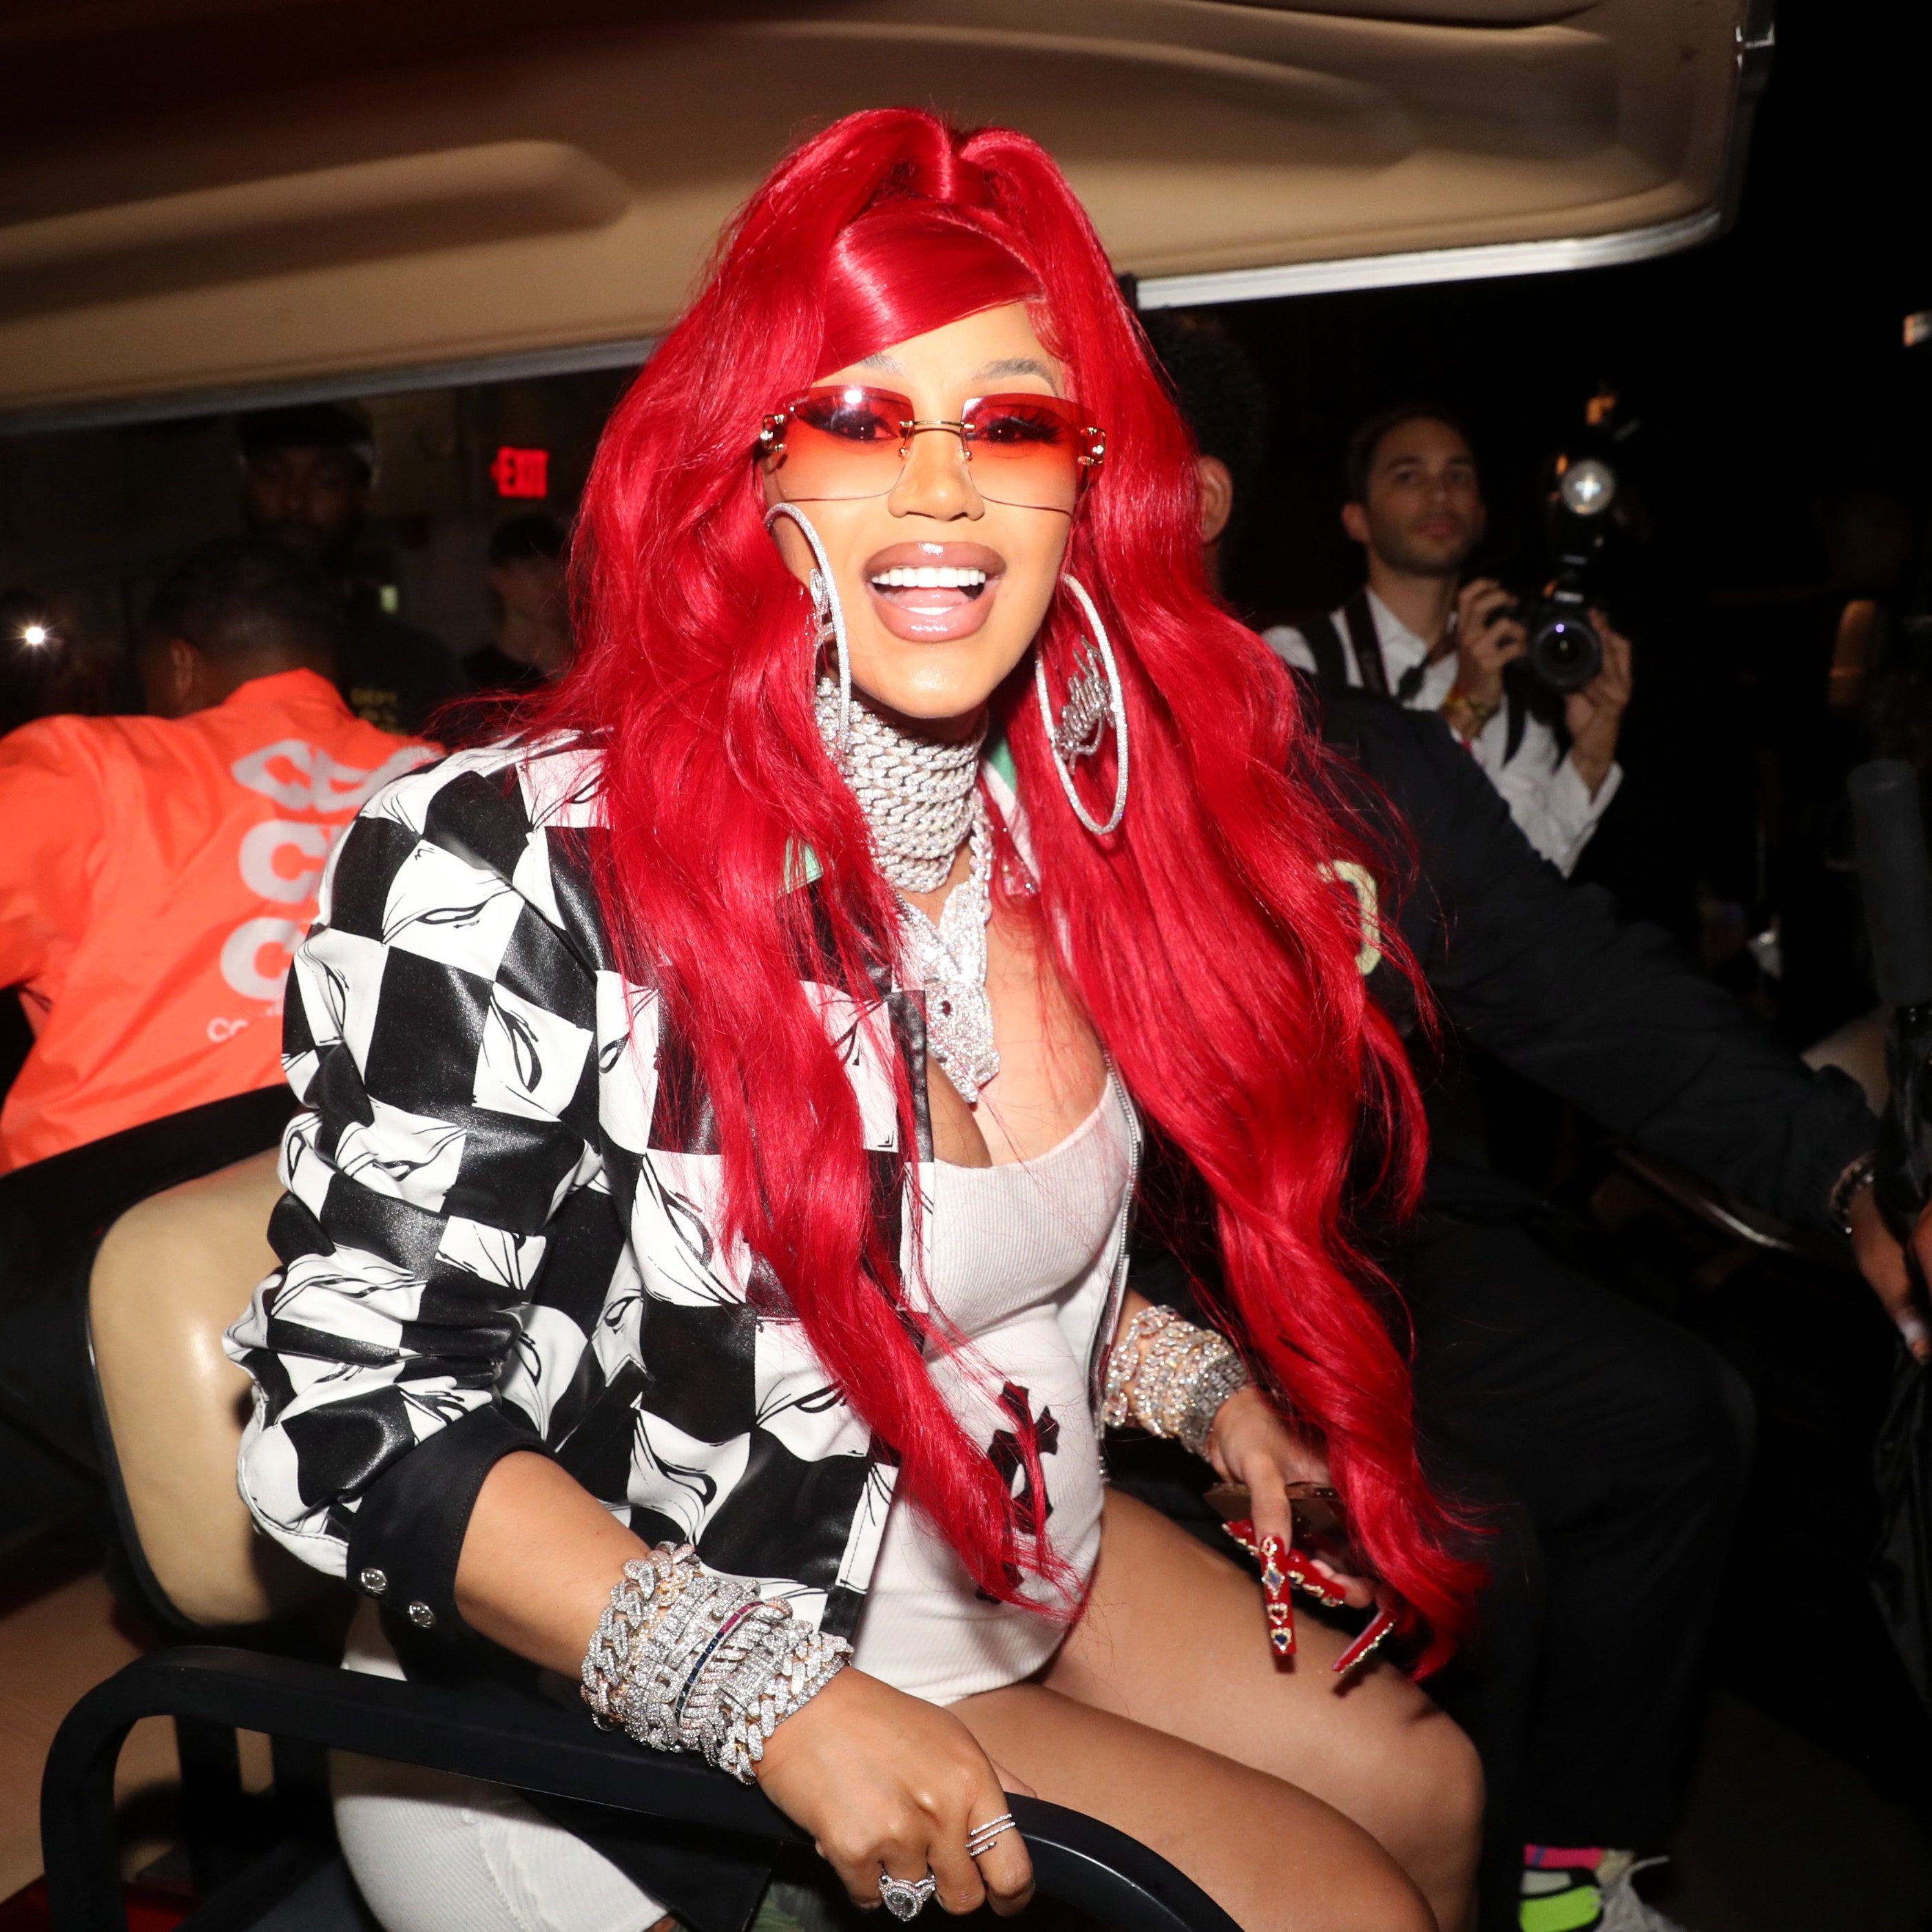 A woman with red hair and glasses - Cardi B